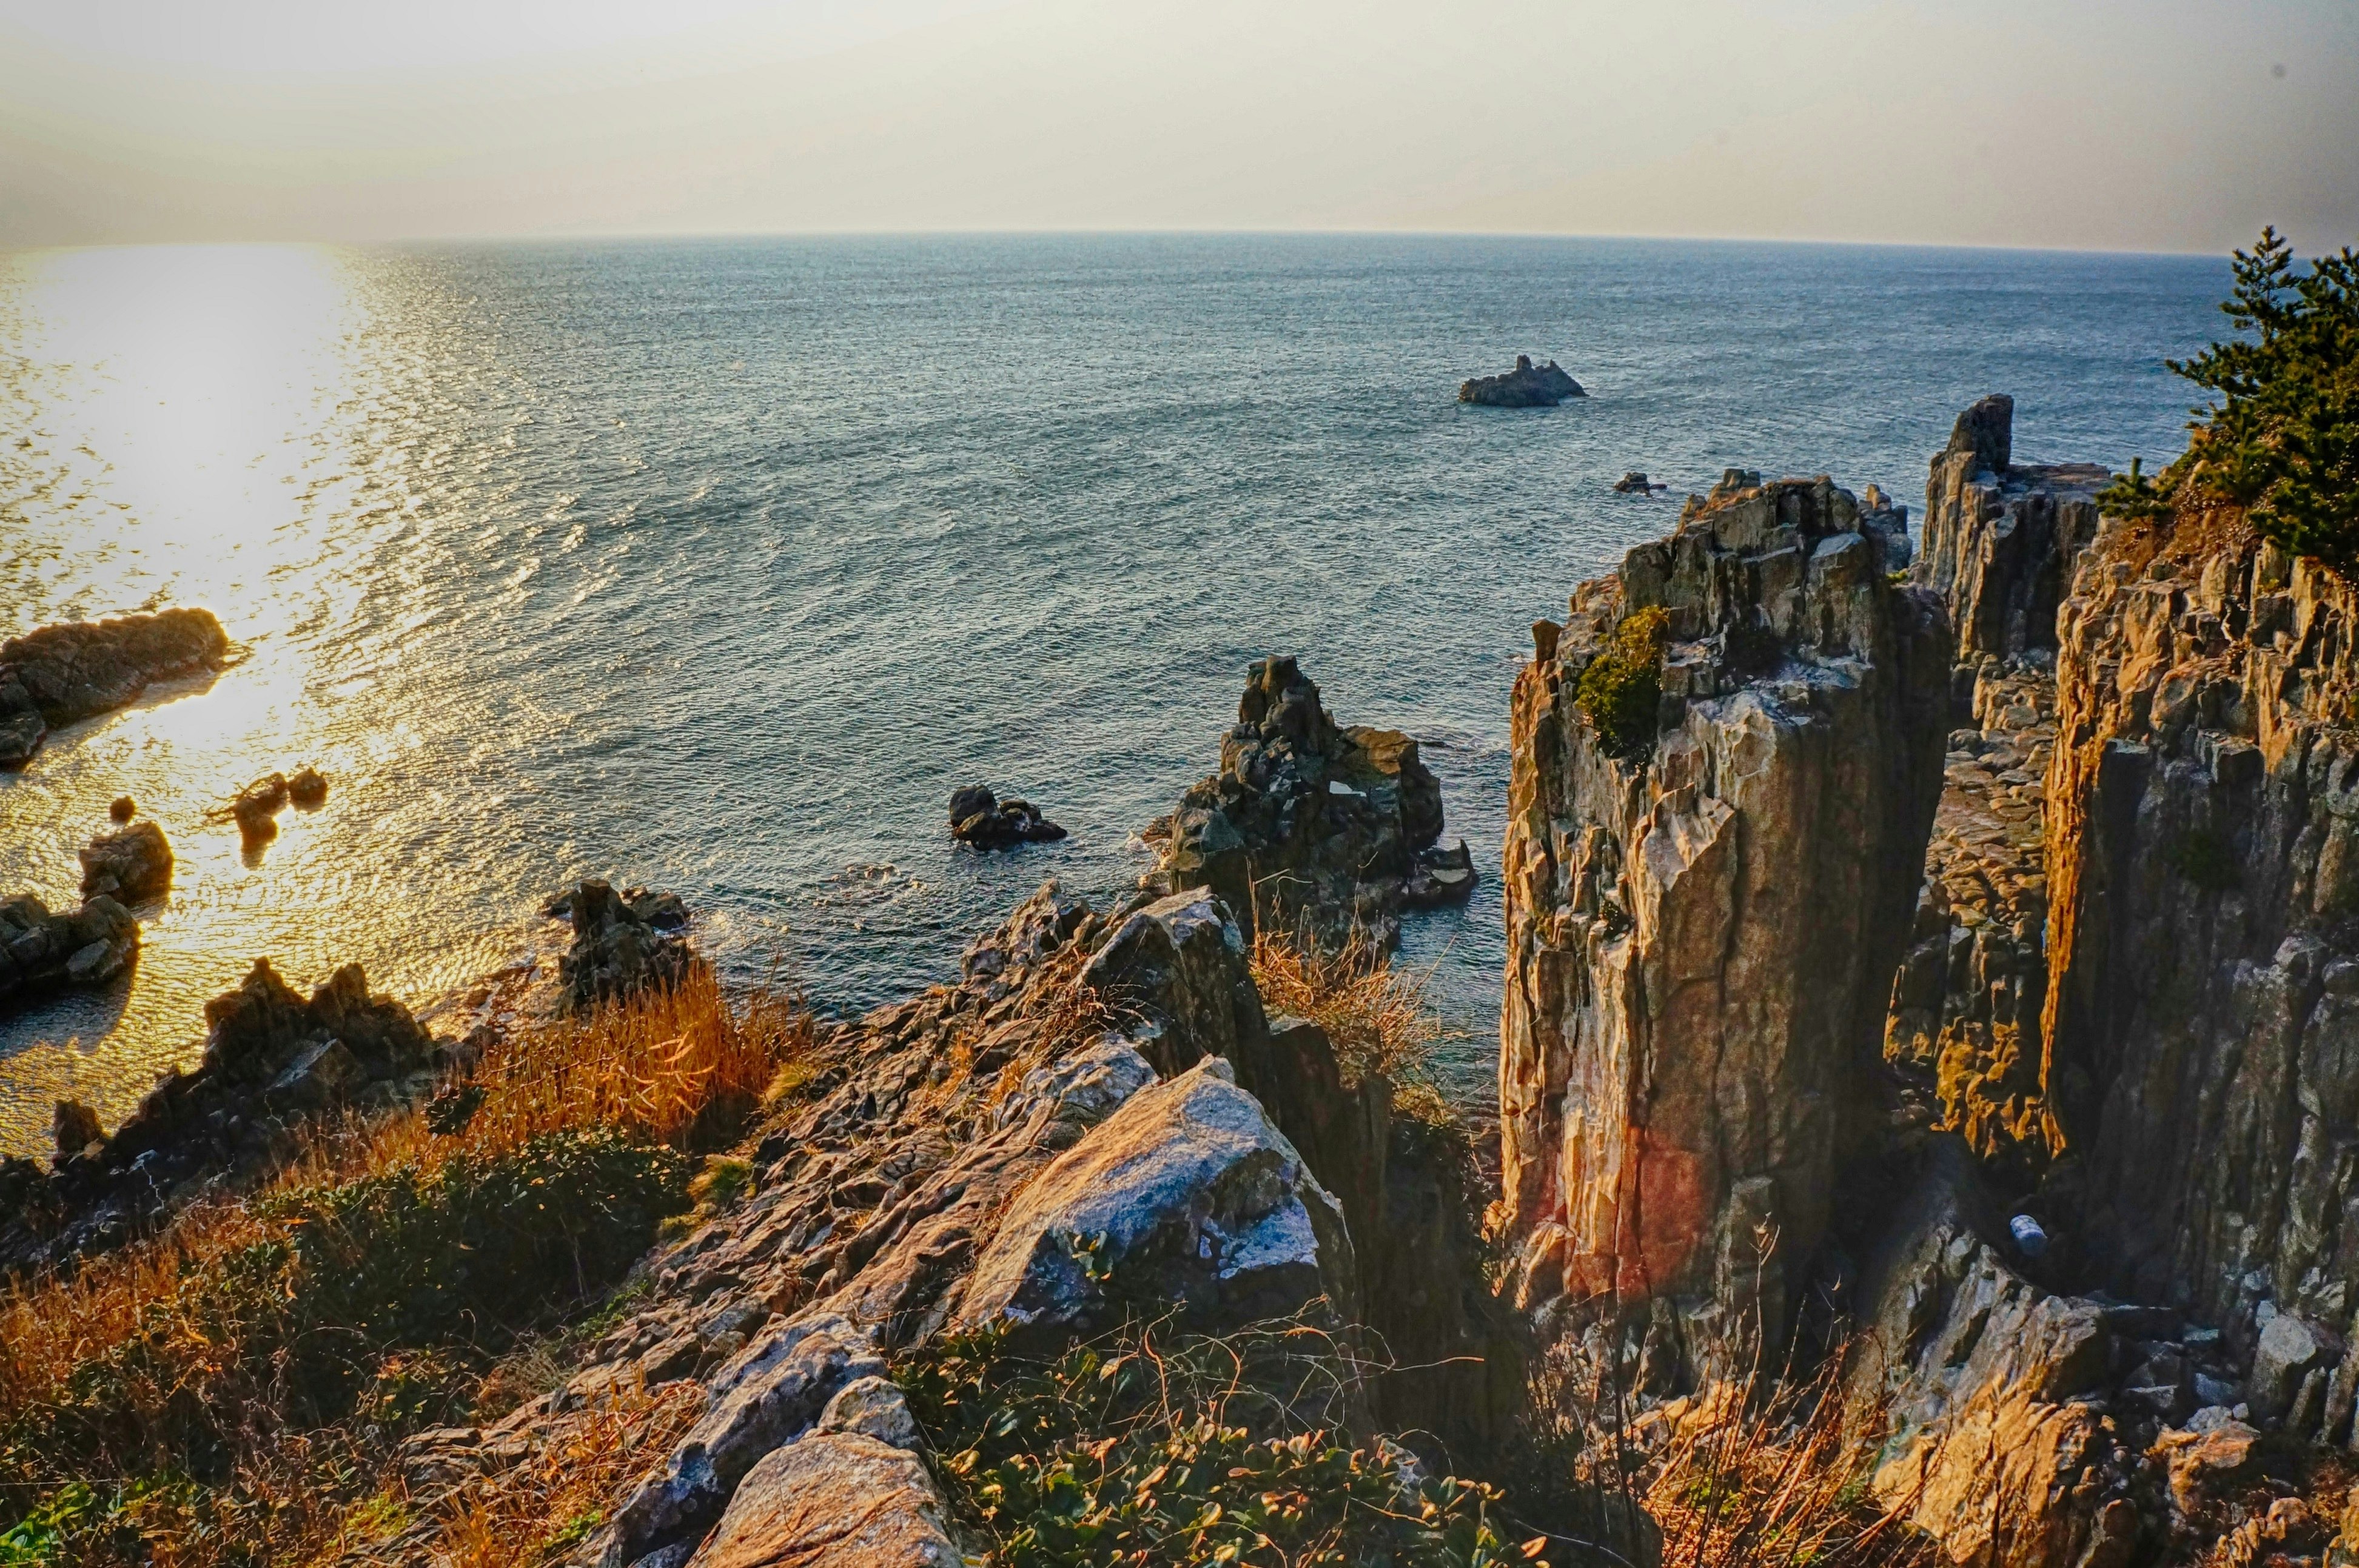 A coastal view looking out to sea at sunset. The rocks on the coast are jagged and some form pillar-like structures.